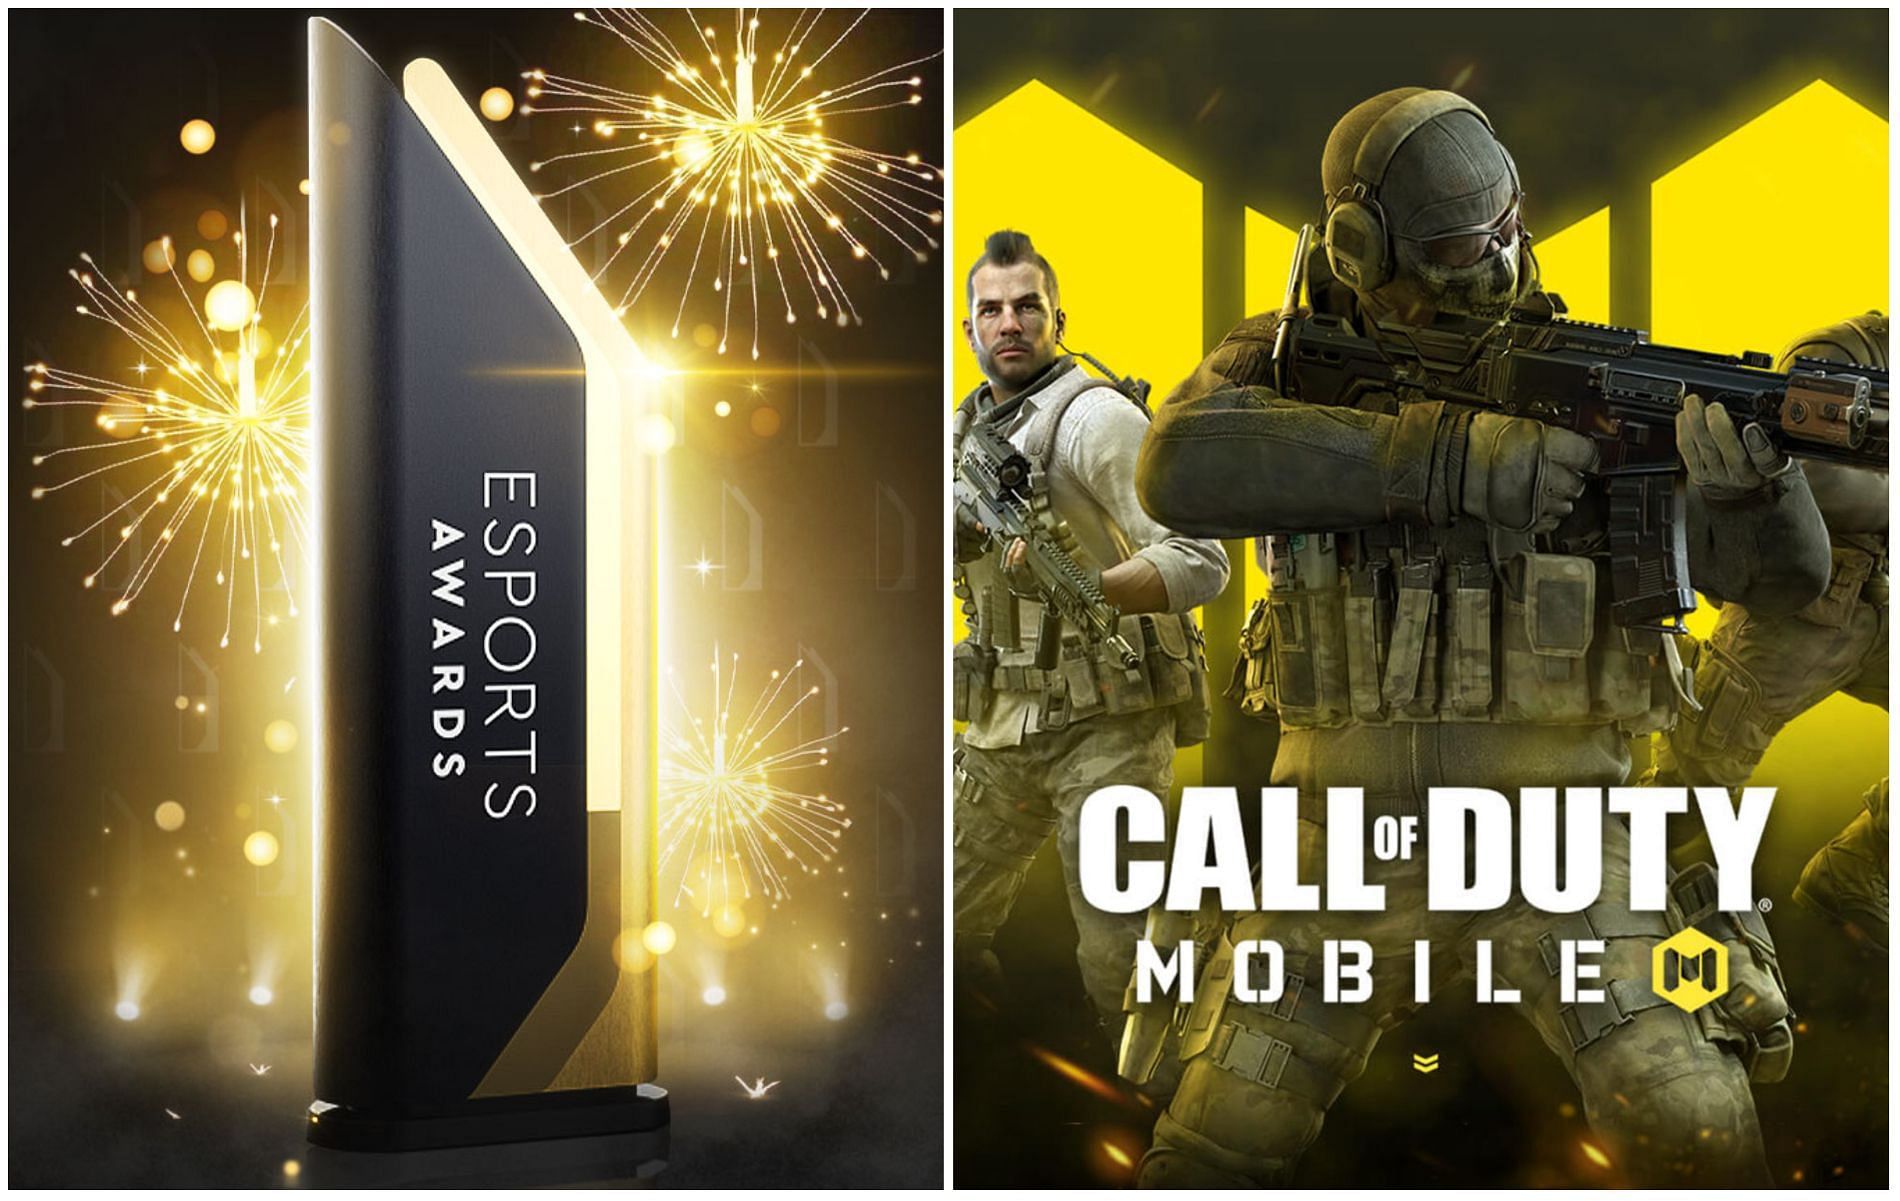 COD Mobile was nominated for the Esports Mobile Game of the Year award 2022 (Image via Esports Awards and Activision)